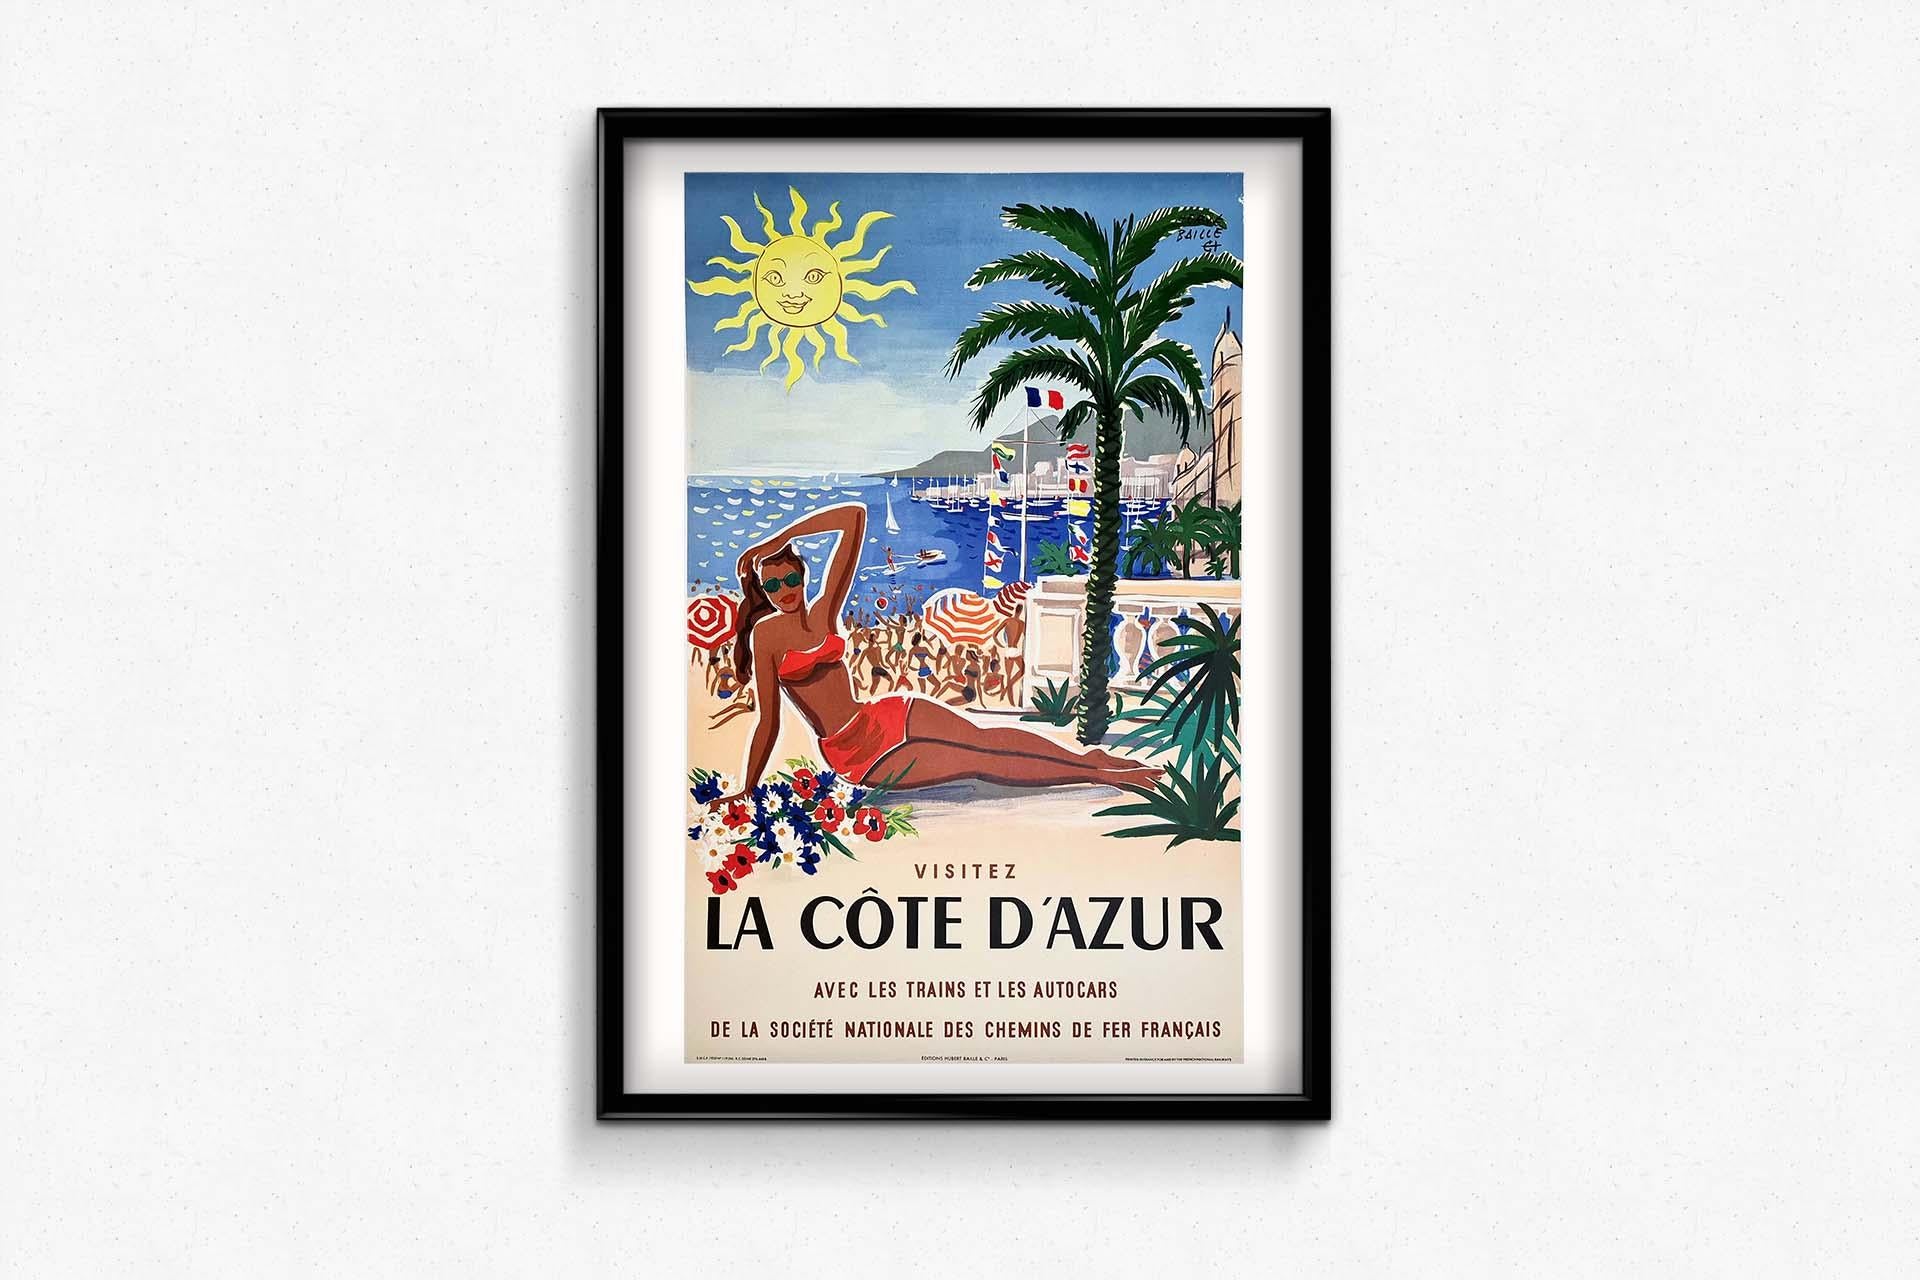 Very nice poster by Hervé Baille 🇫🇷 (1896-1974) a French draftsman and engraver. During his career he was a member of the drawing committee of the Salon des Humoristes, and illustrated railroad and airline posters in the 1940s. 

This poster was